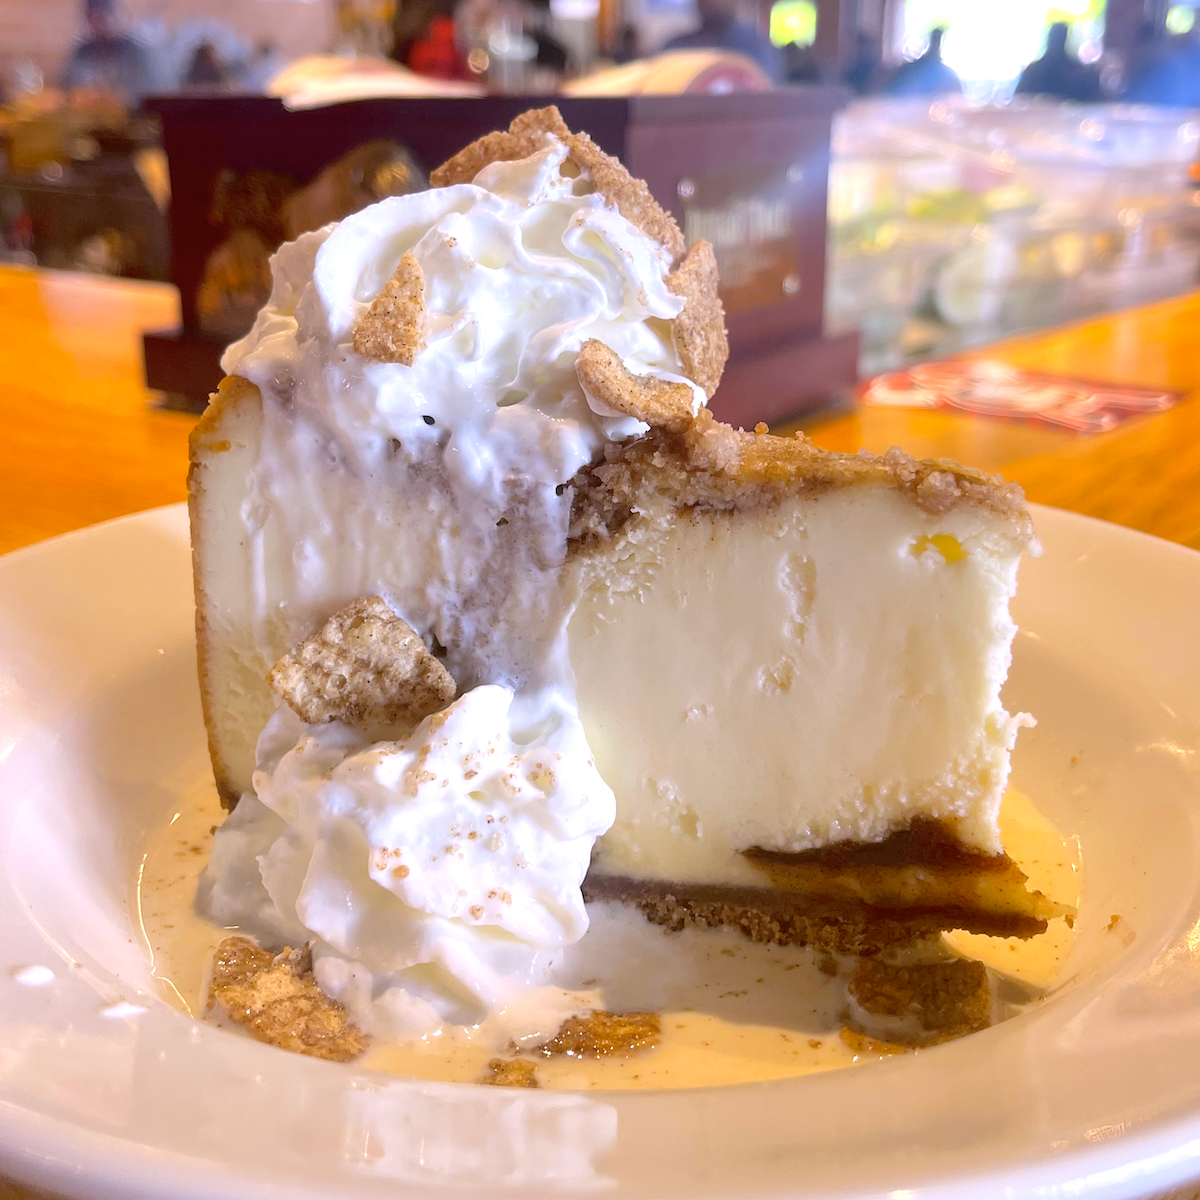 Cinnamon Toast Crunch Cheesecake from Twin Peaks Restaurant in Doral, Florida